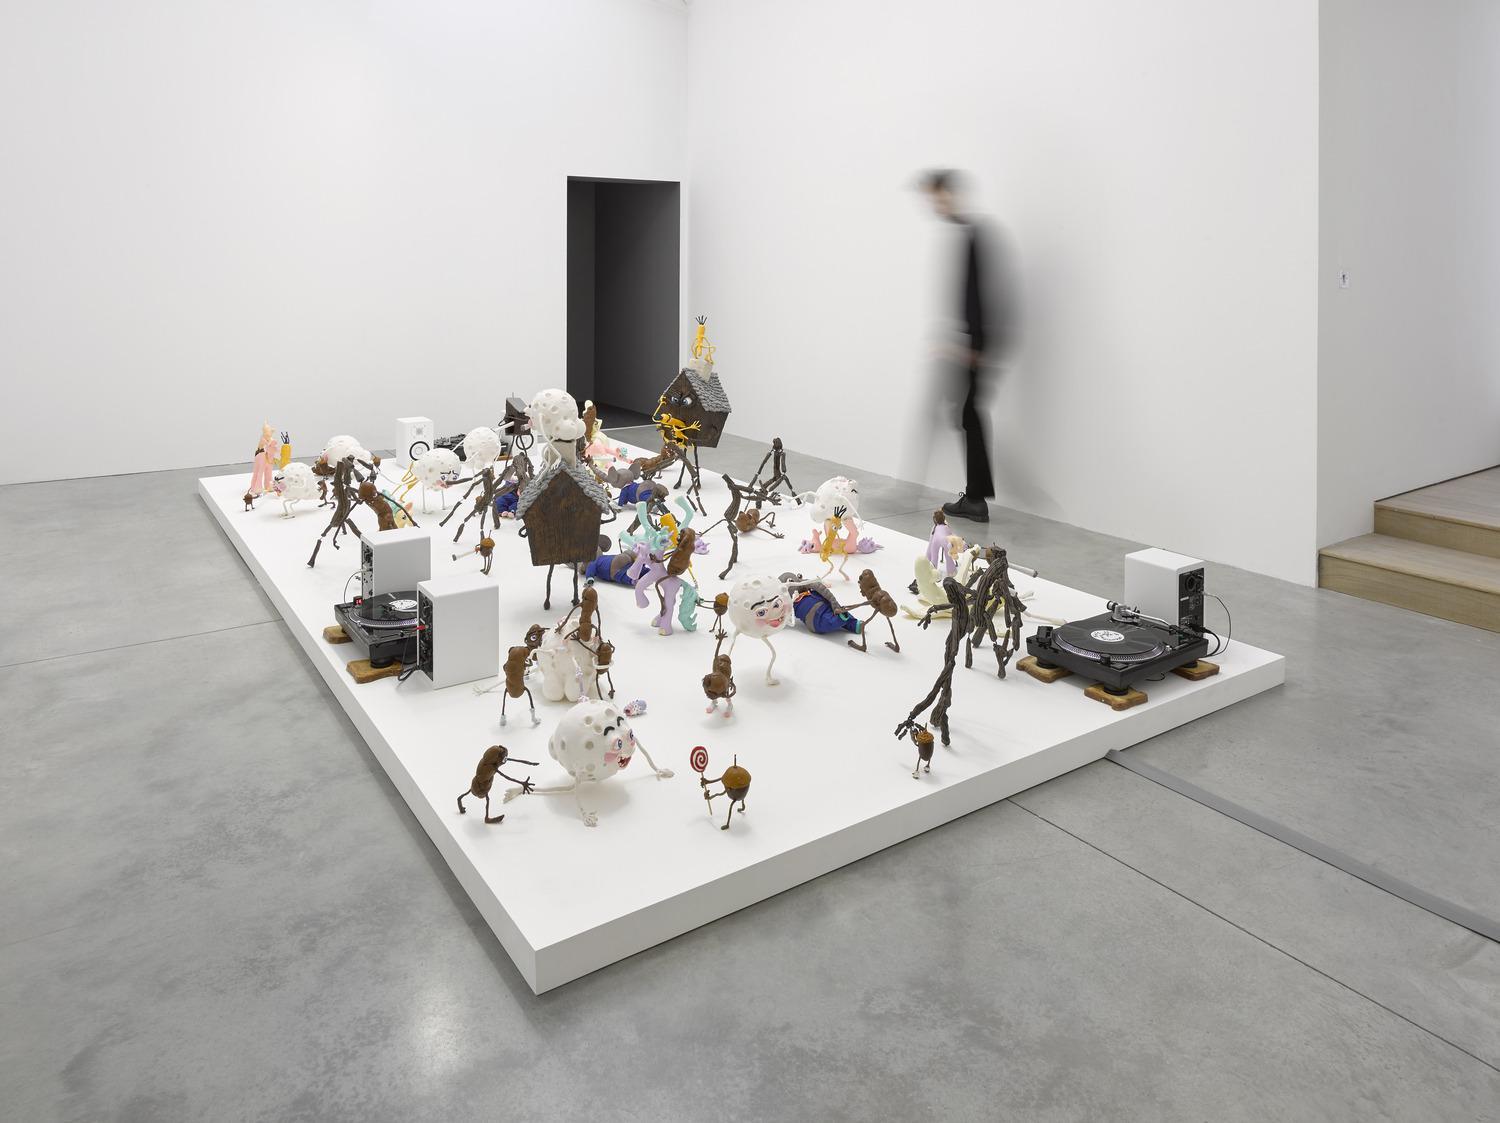 A spatial installation with several small sculptures and three record player, called ‘Who am I to Judge, or, It Must be Something Delicious, made by the artists Nathalie Djurberg and Hans Berg. A man is seen blurry in the background.